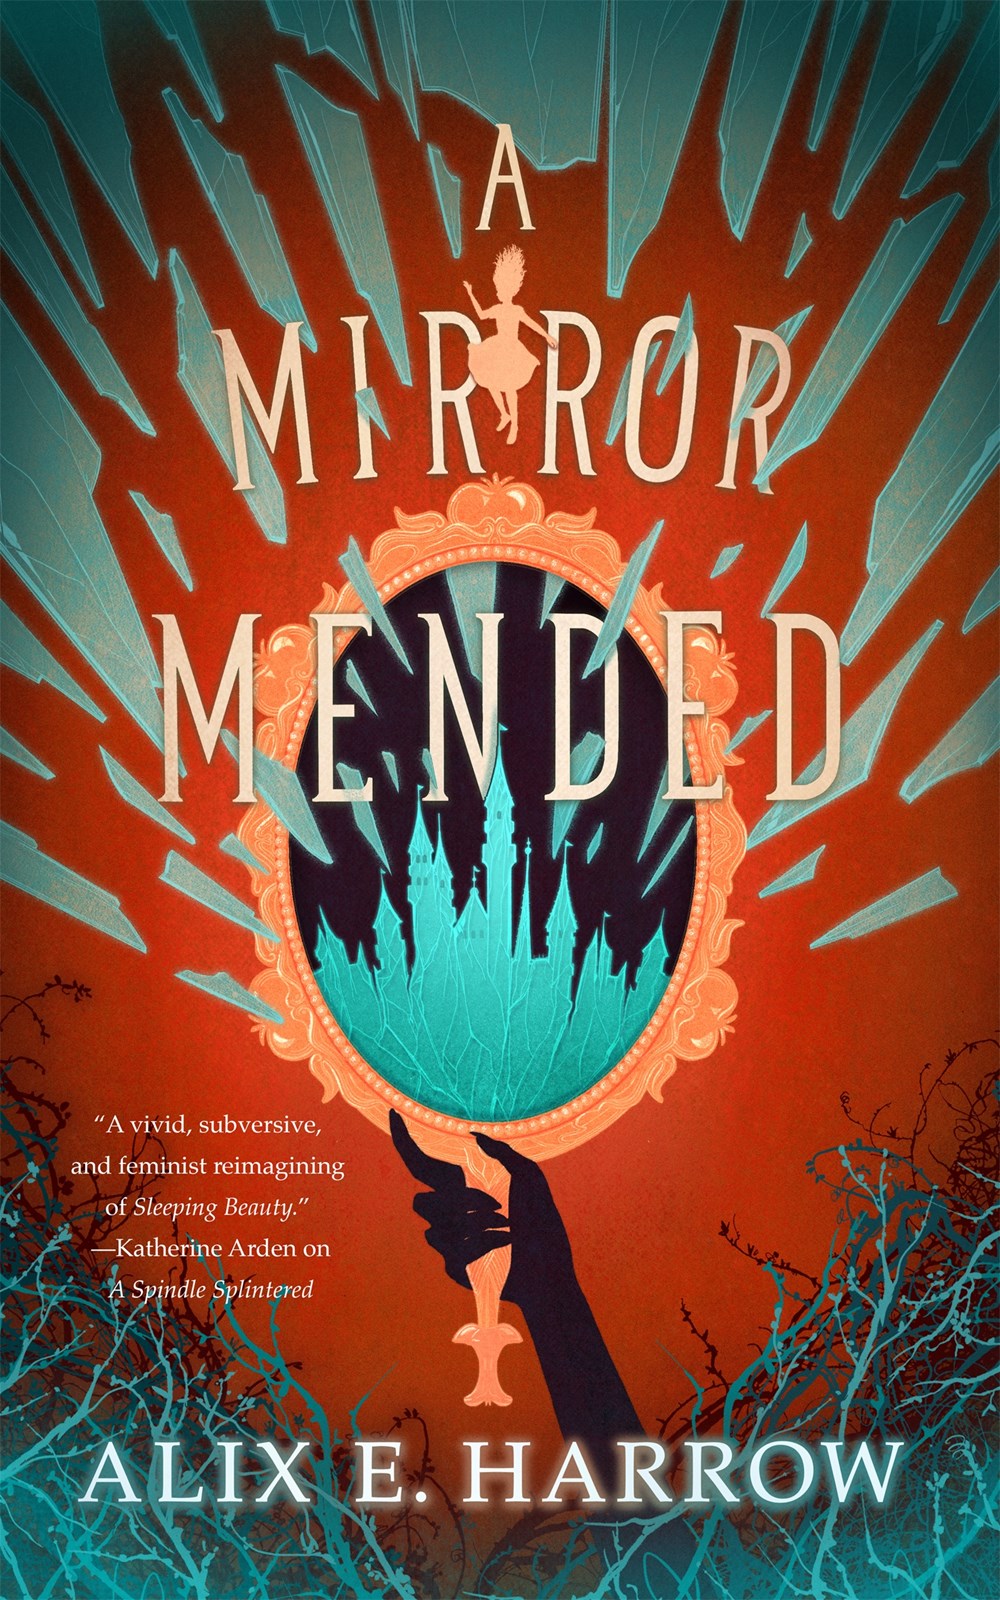 A Mirror Mended